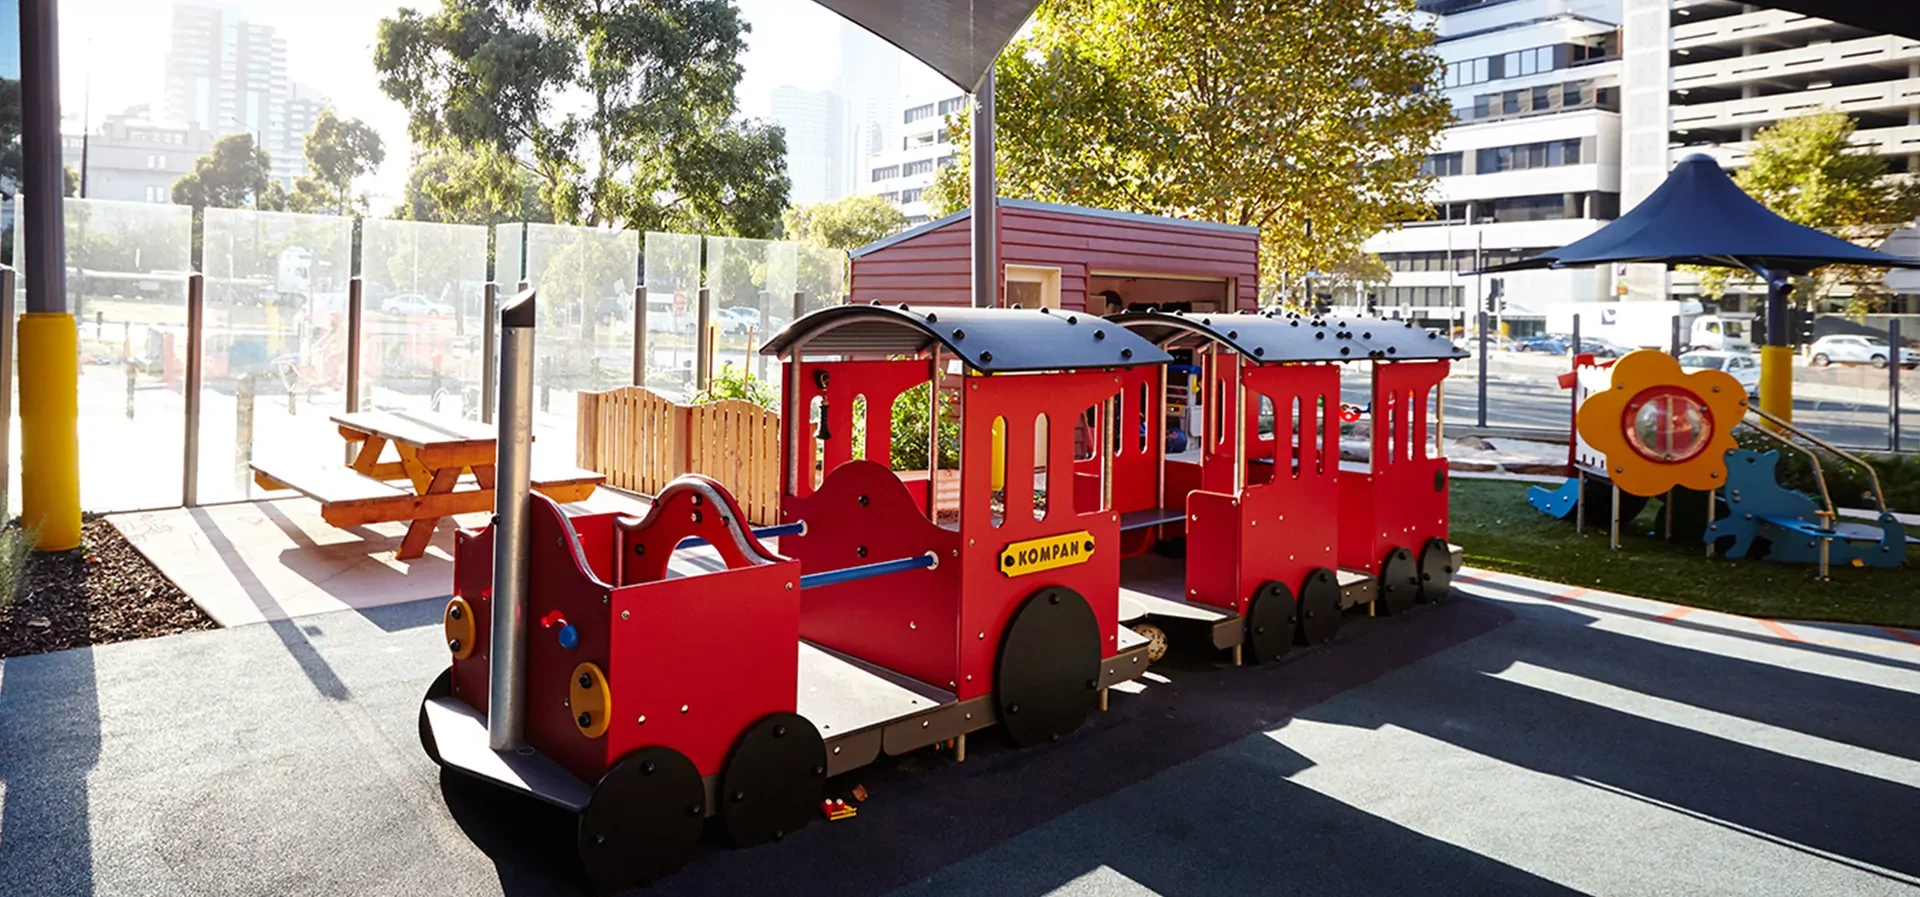 hero image of playhouses and themed playground equipment shaped as a train